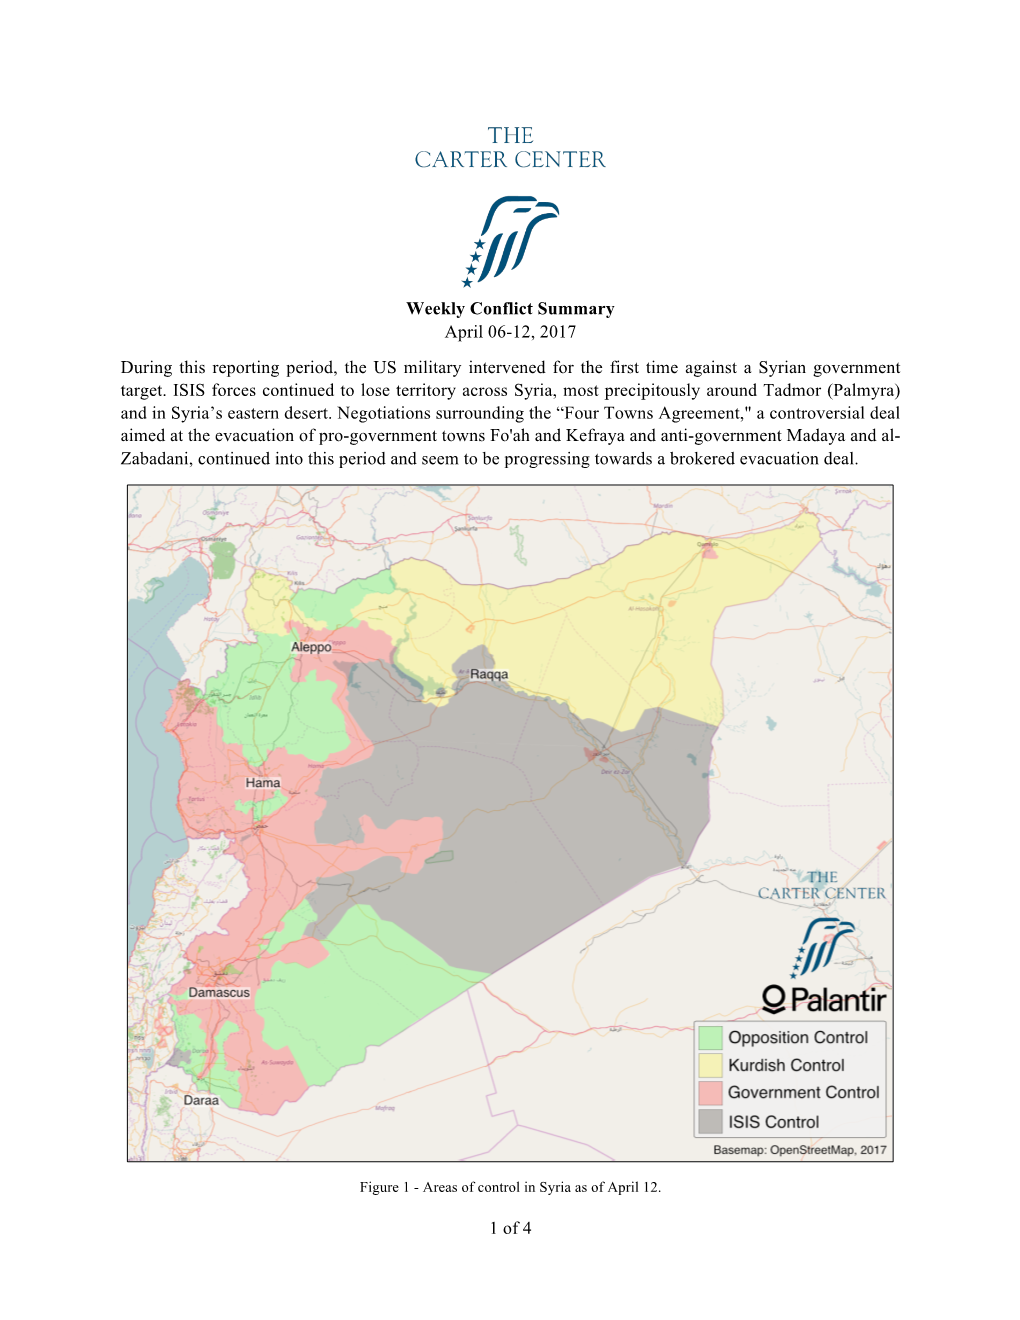 Weekly Conflict Summary April 06-12, 2017 During This Reporting Period, the US Military Intervened for the First Time Against a Syrian Government Target